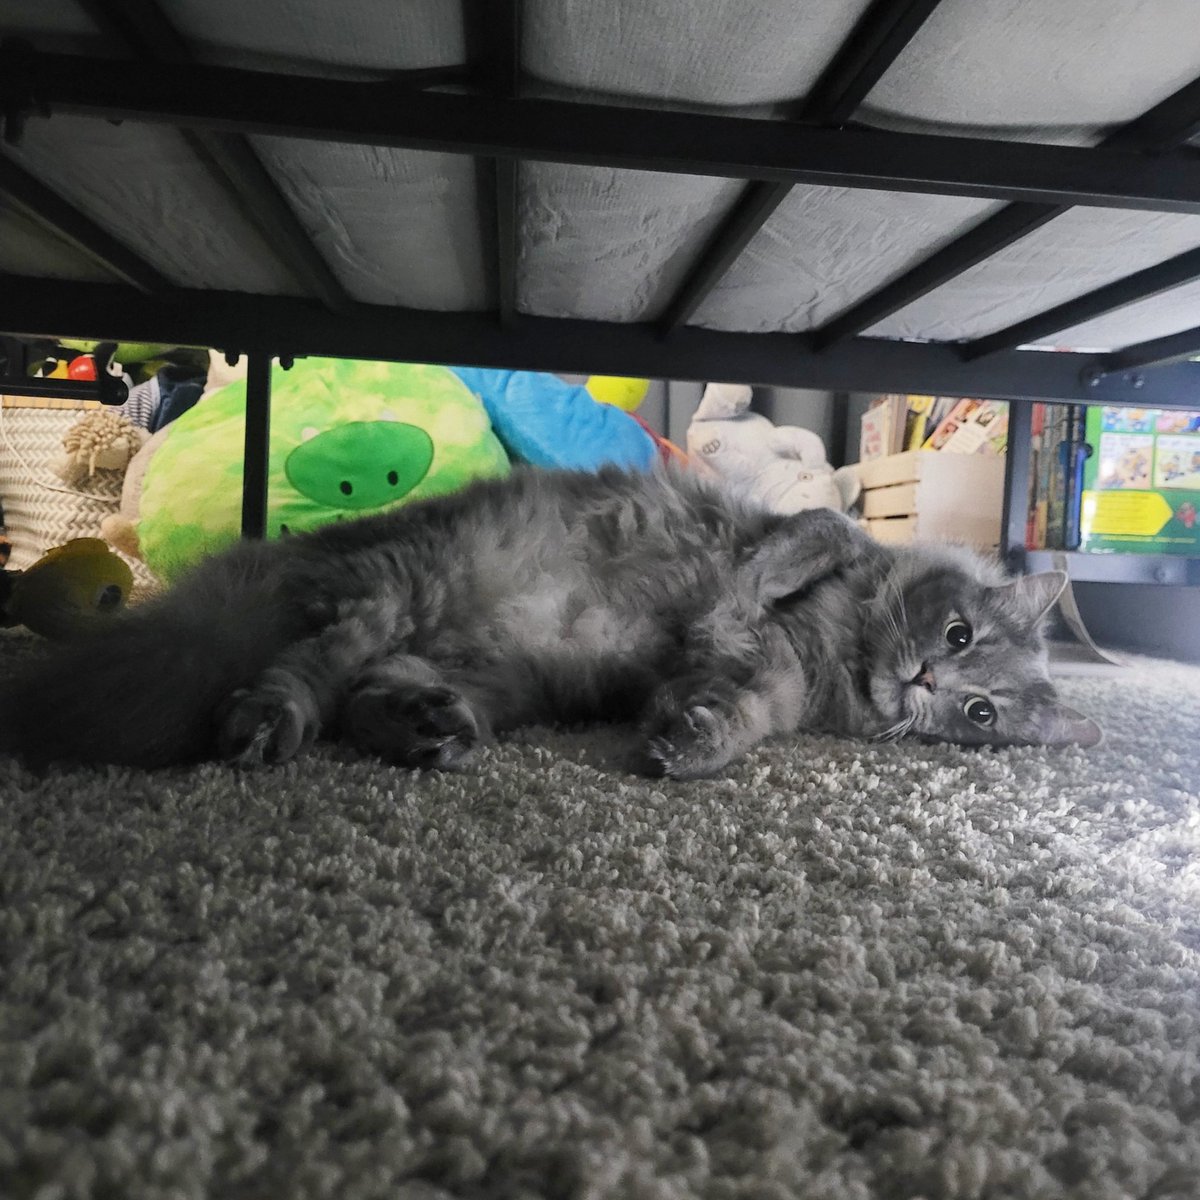 'Under the Bed Bum.' His bumming knows no bounds, really. 

#OPLiveKitty #OPLive #OPNation #OPLiveNation #REELZonPeacock